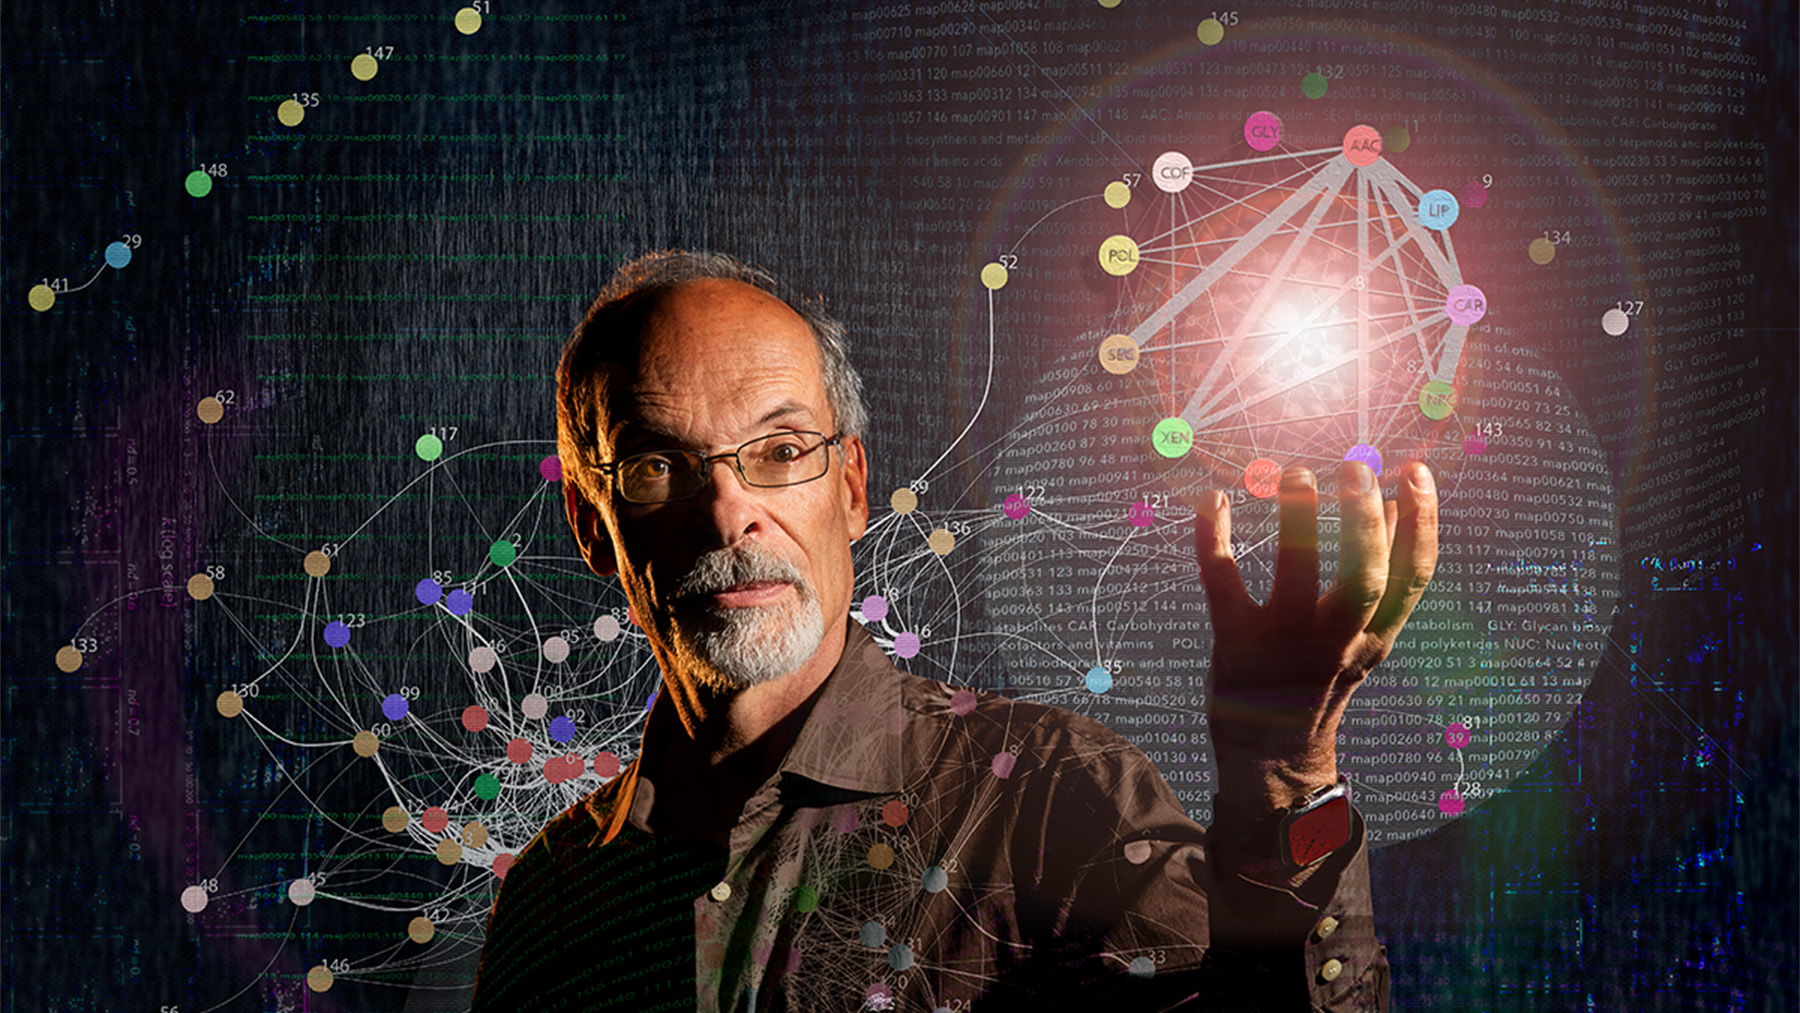 Gustavo Caetano-Anolles surrounded by depiction of molecular networks. Image by Fred Zwicky.